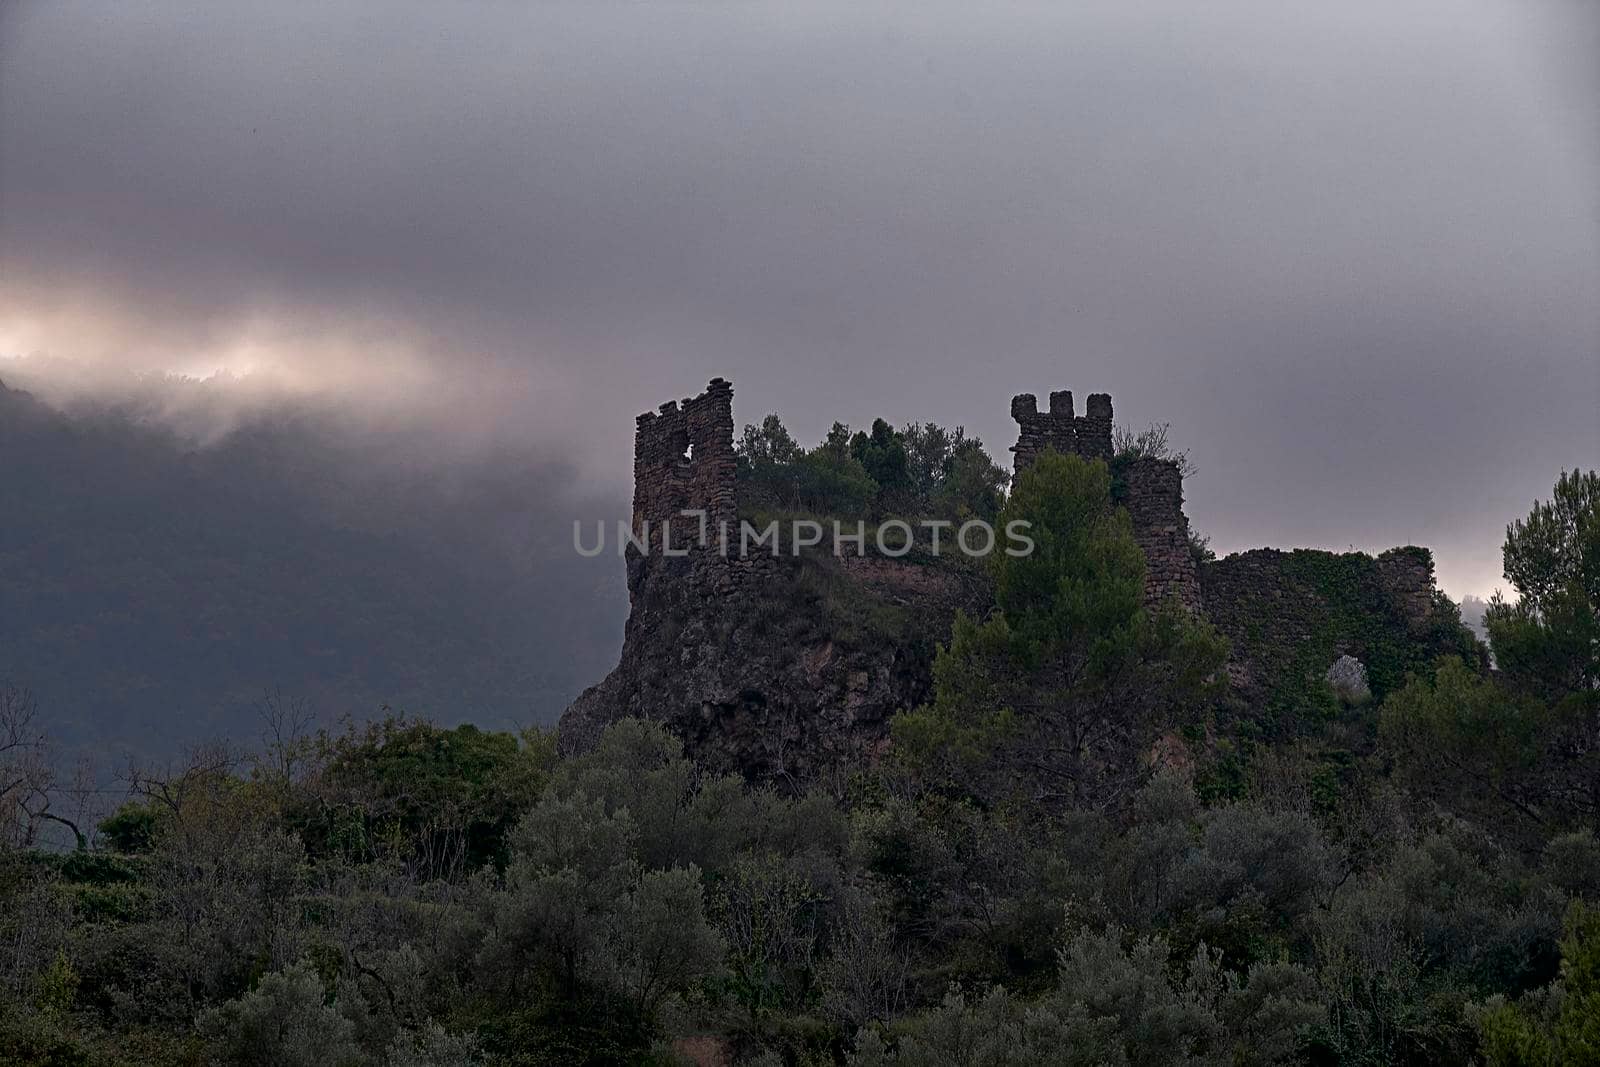 Jinquer, Castellon, Spain. Ruins of abandoned castle on top of mountain.Mediterranean forest, olive trees, pines, sky with storm clouds